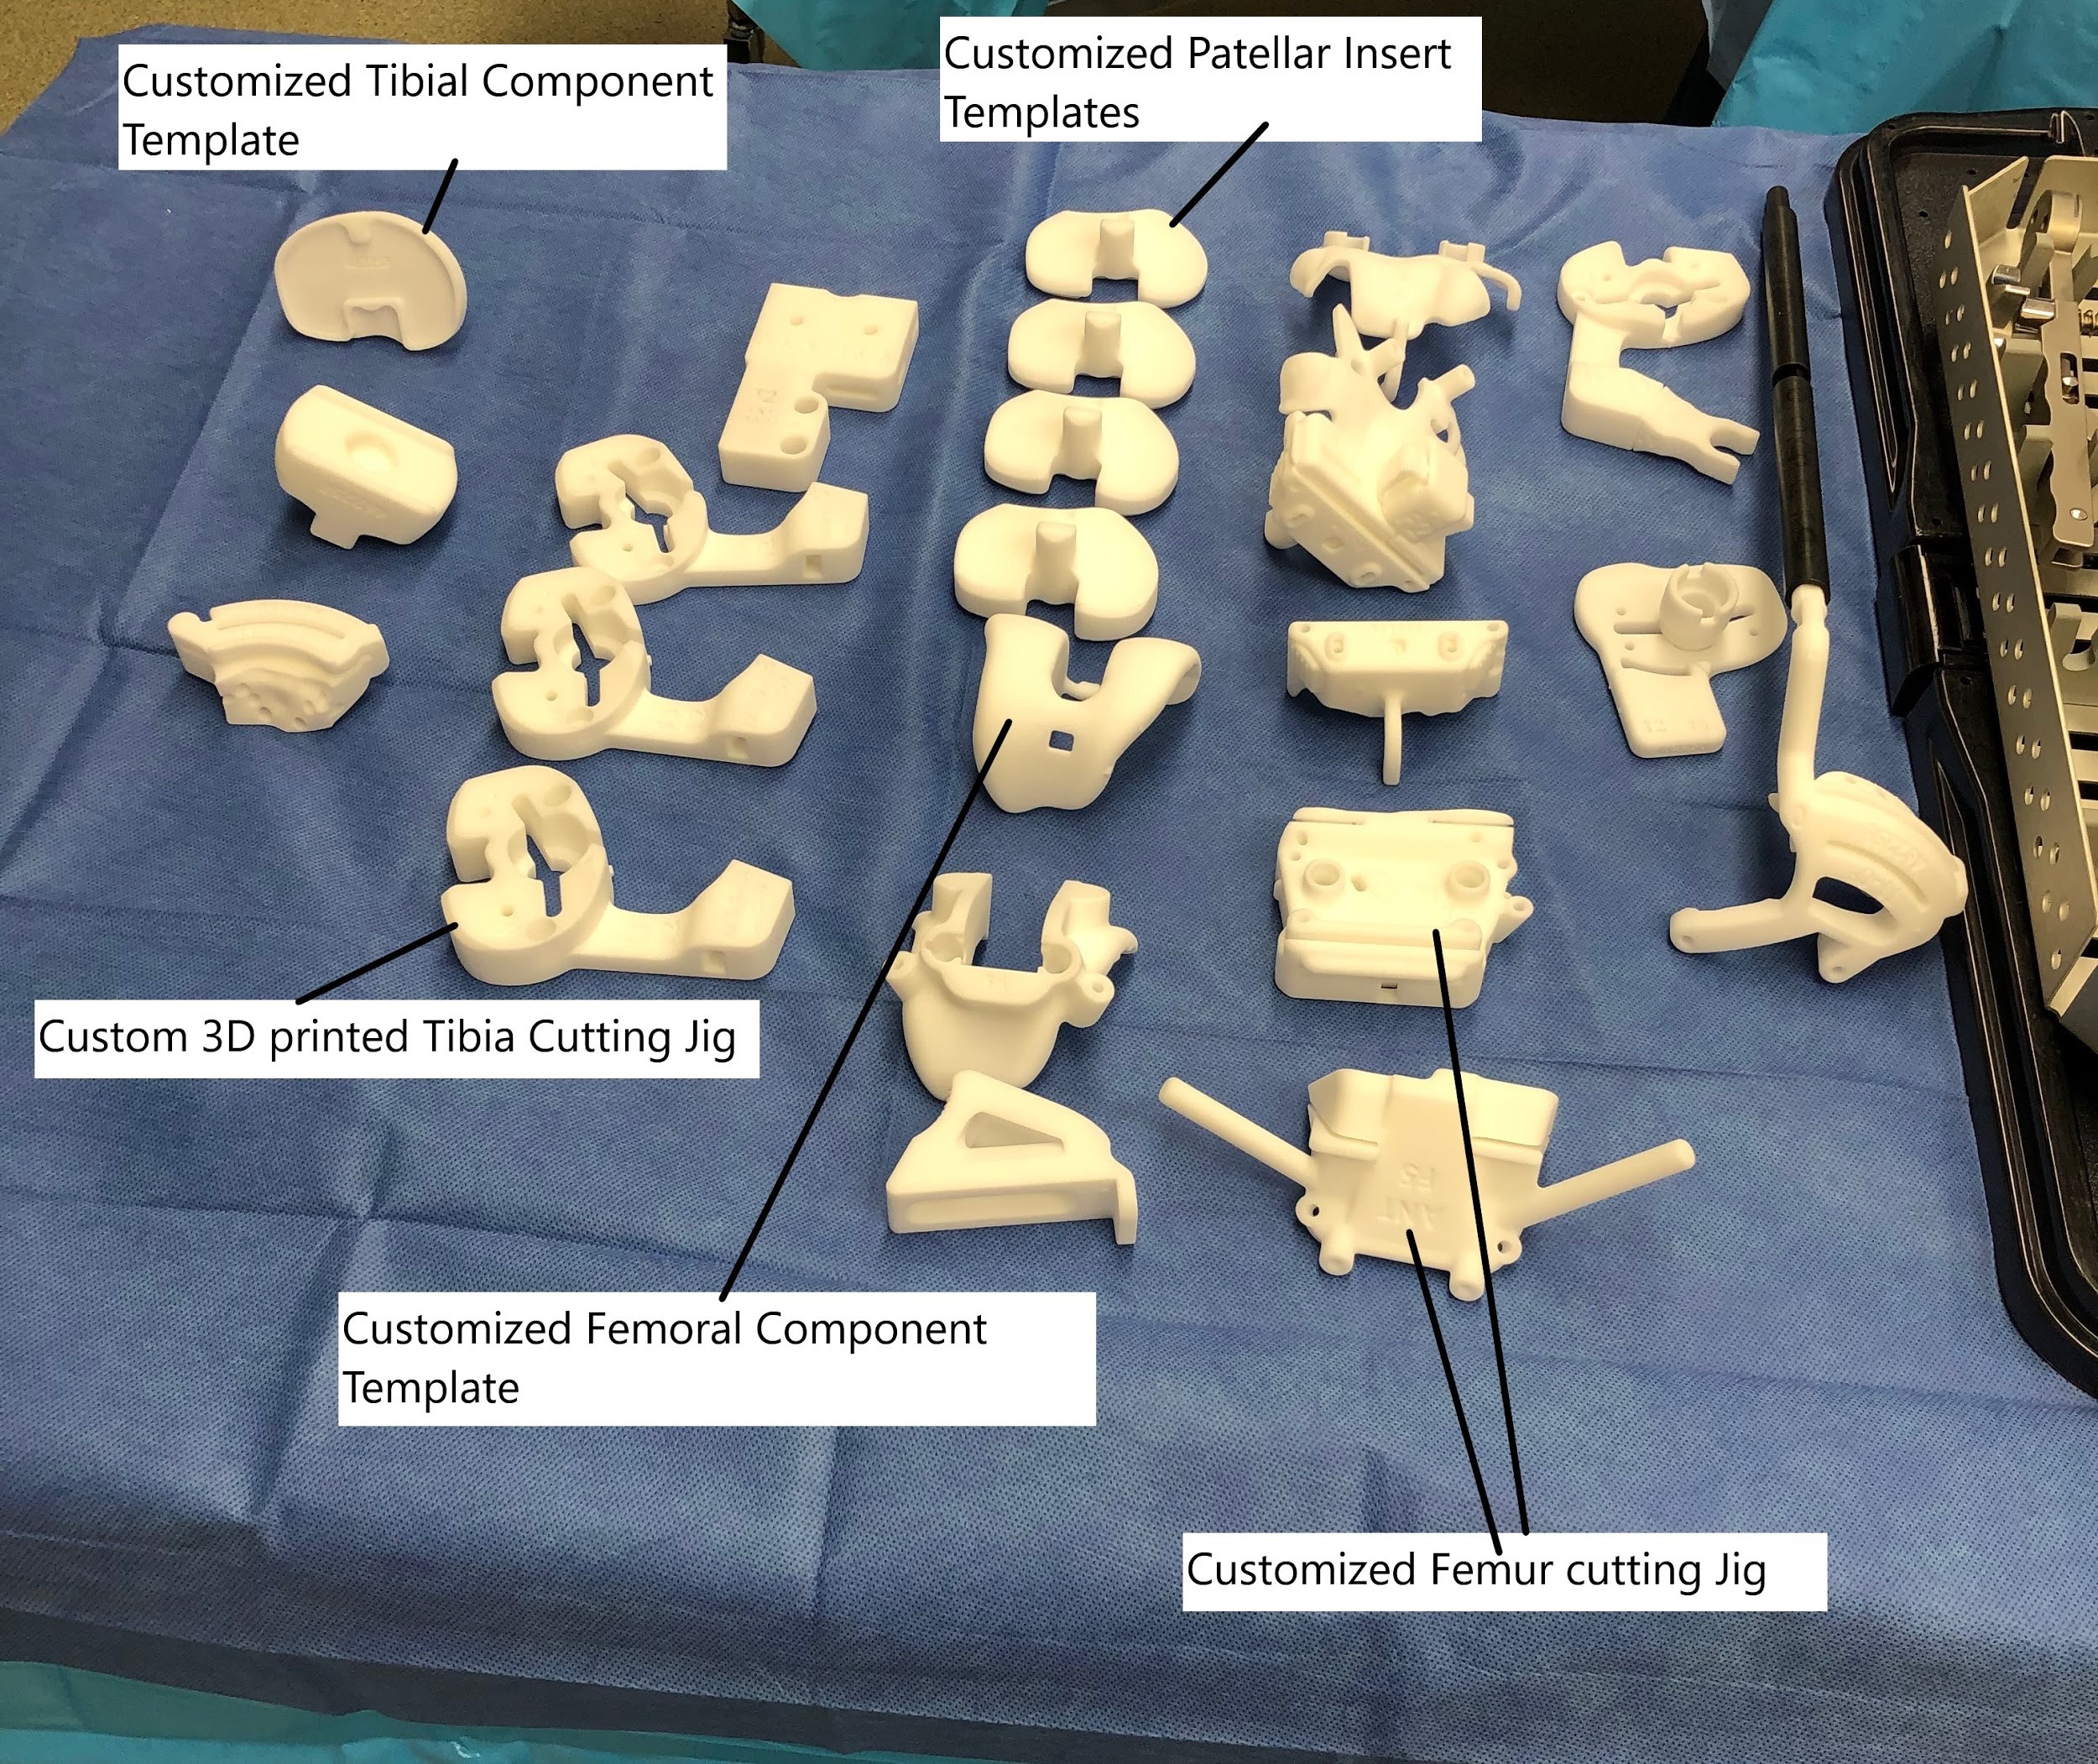 Customized 3D printed instruments and templates for assisting knee arthroplasty